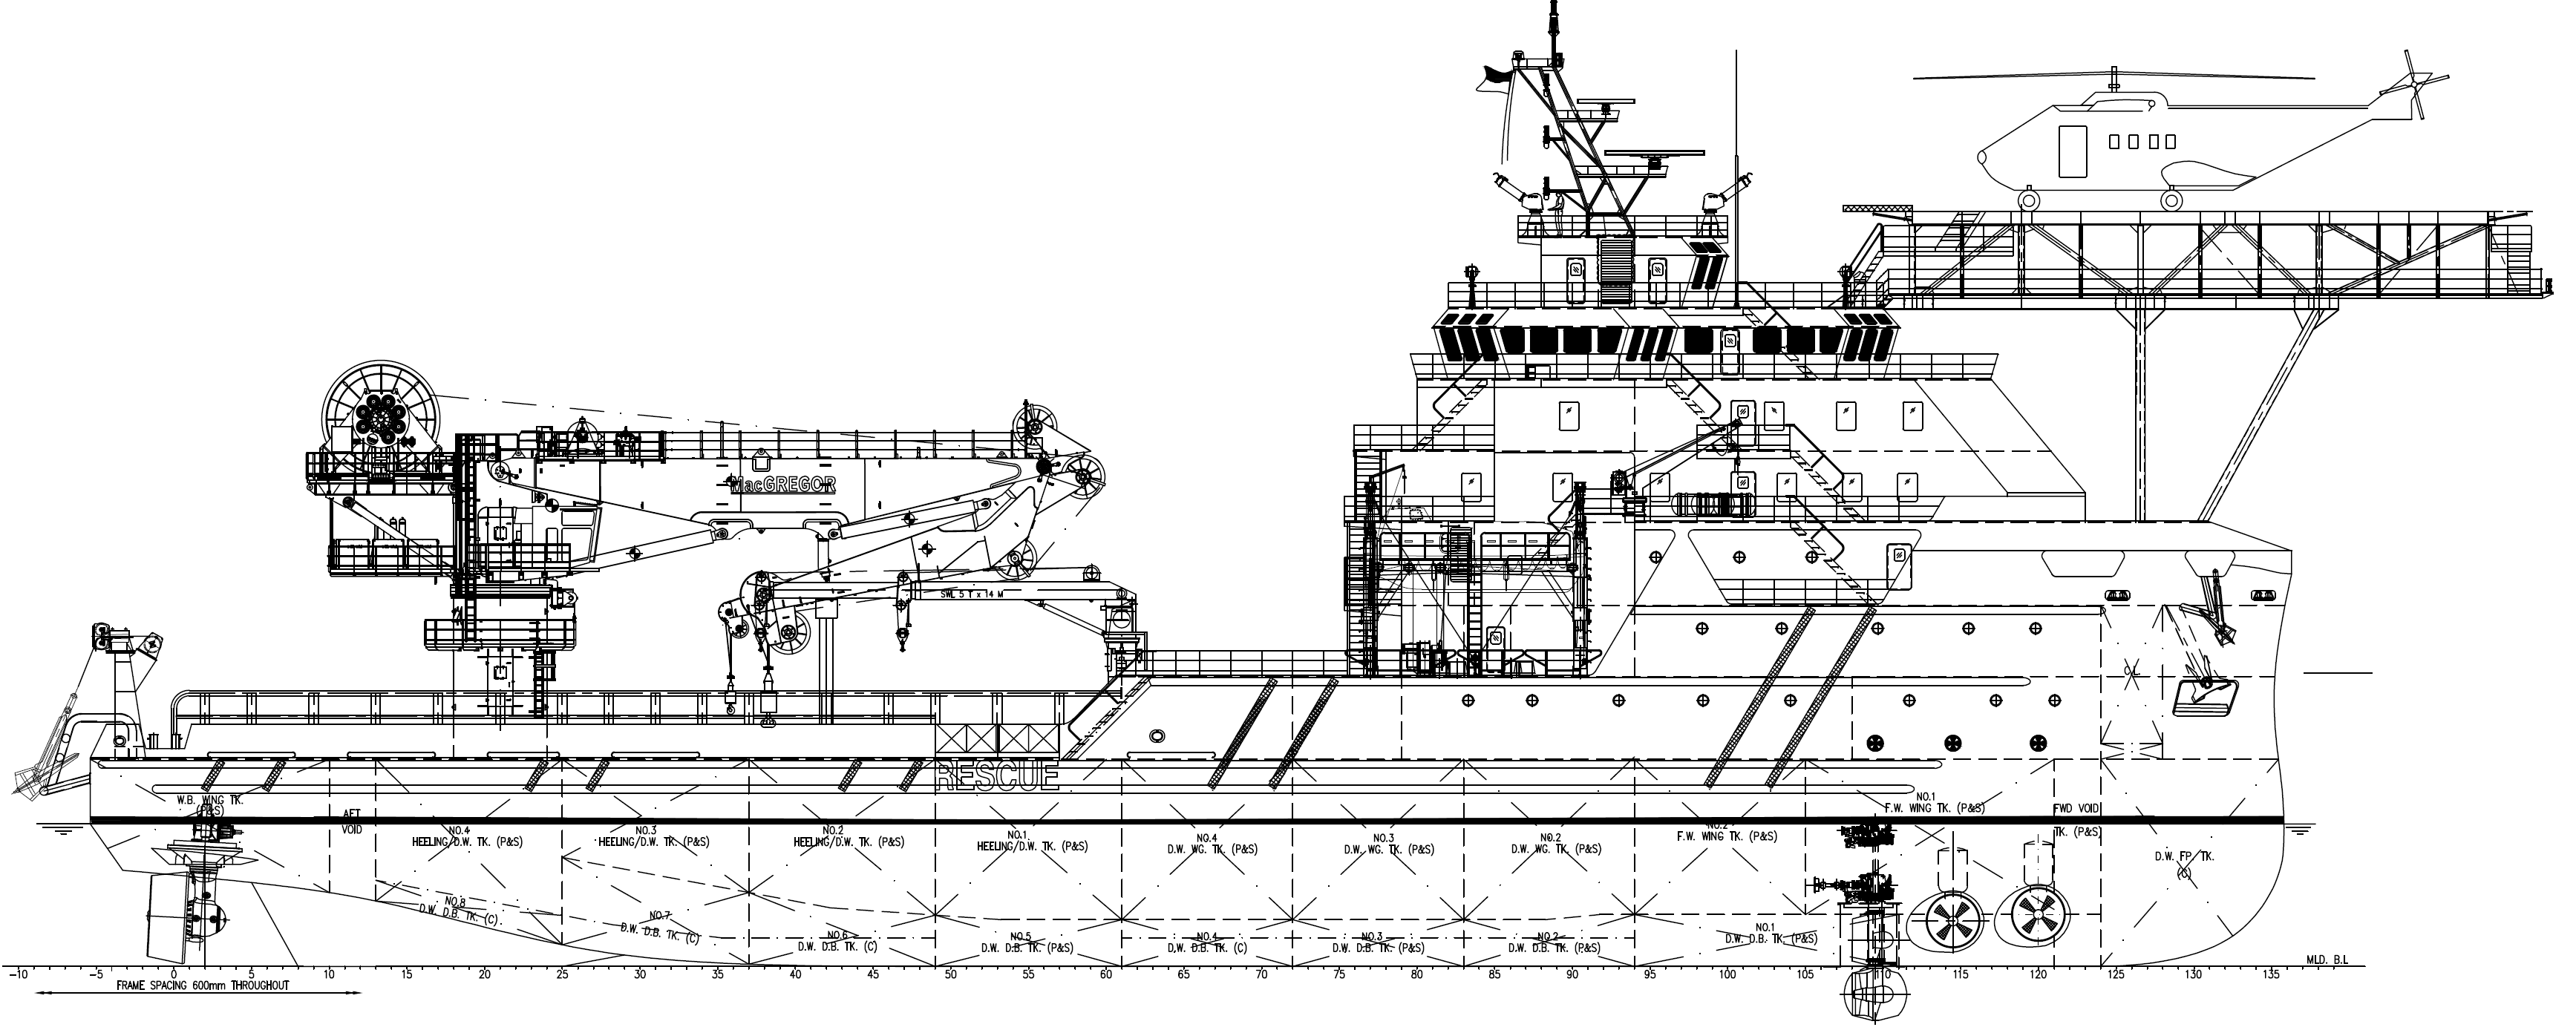 85m Diesel-Electrical Driven Subsea Support / Maintenance Vessel